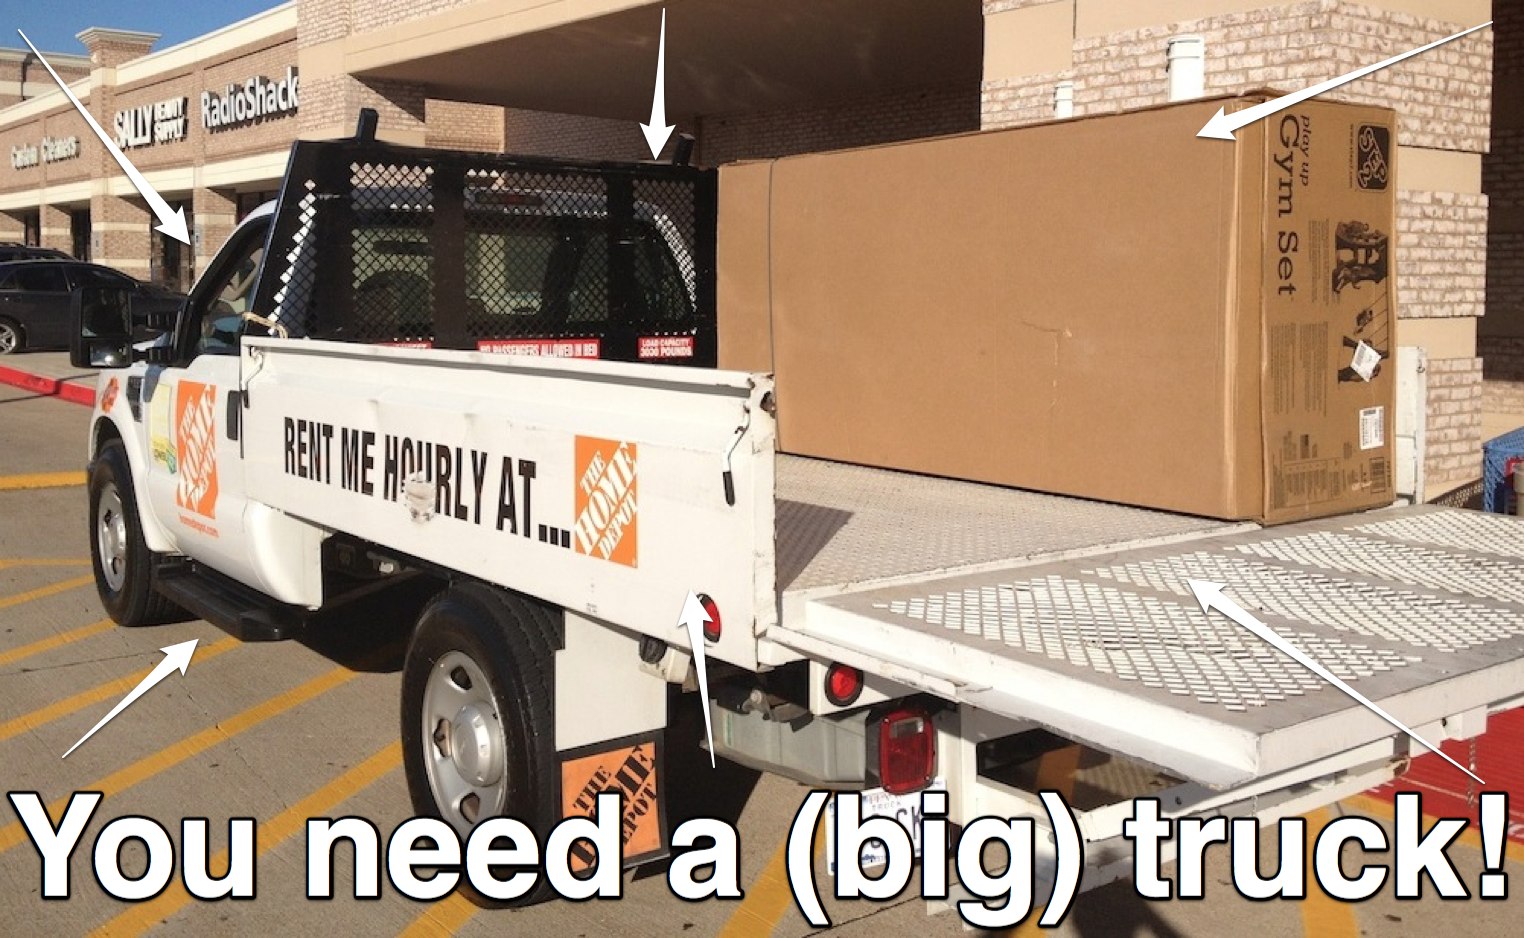 Home depot rental prices   car and truck rental prices